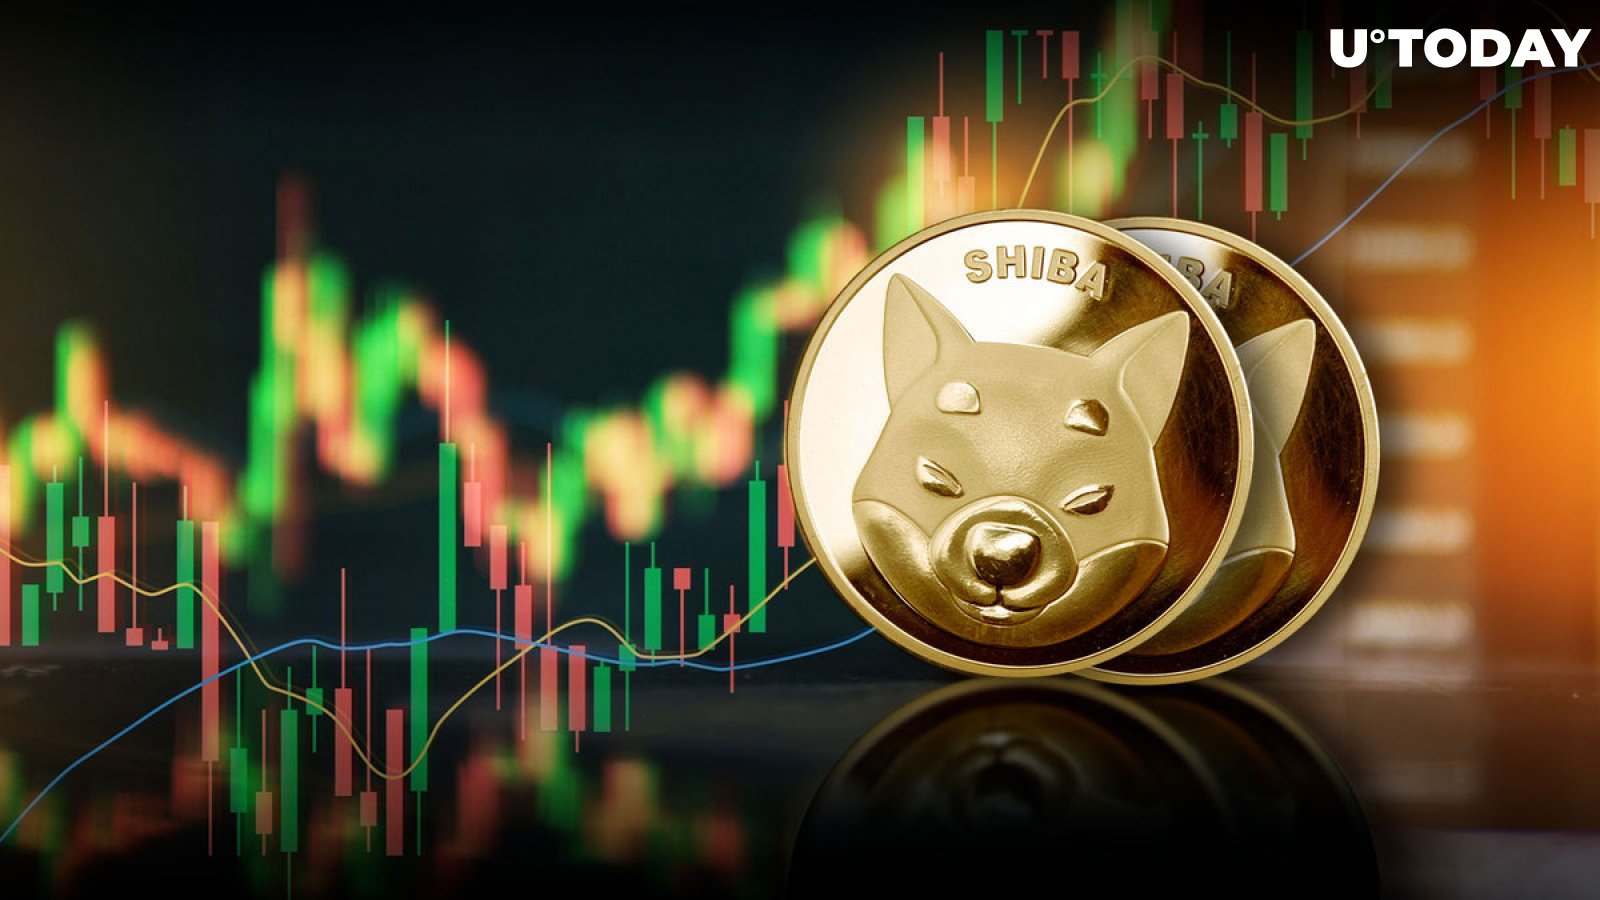 Shiba Inu Triggers 1,104% in Inflows as SHIB Price Hits Two-Year High